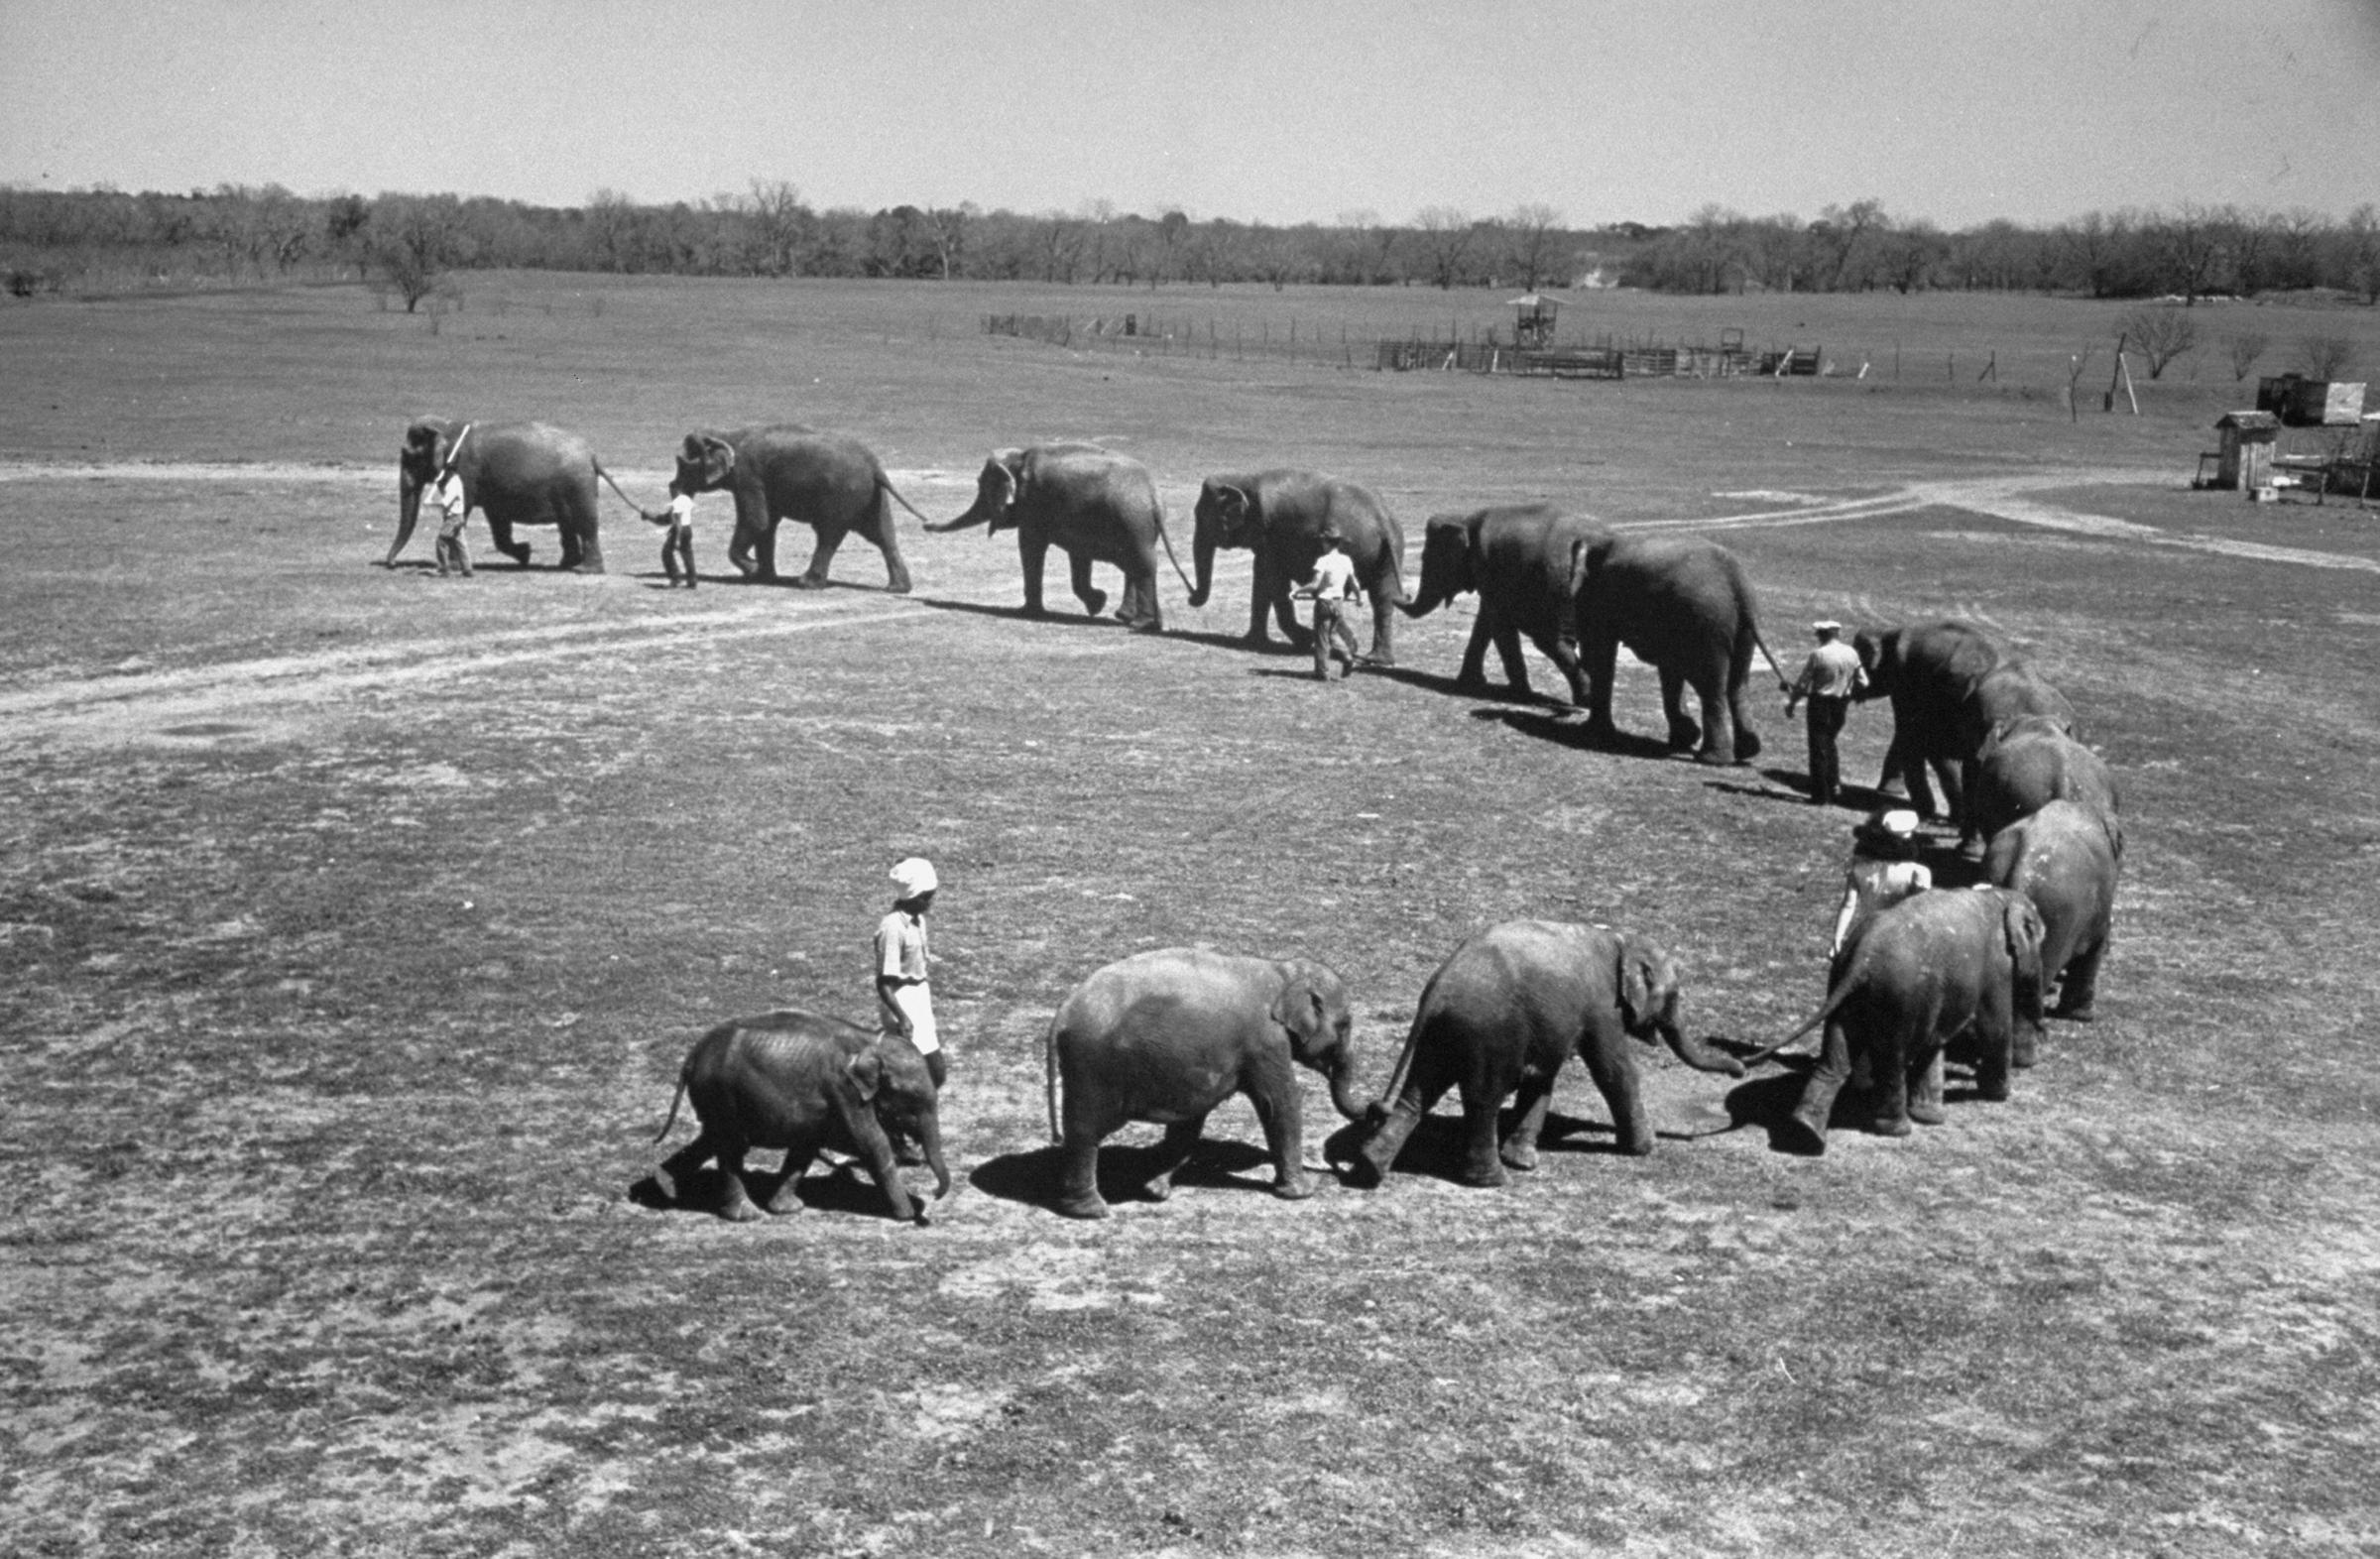 "Butch", baby female Indian elephant in the Dailey Circus, bringing up the rear in line of twelve elephant performers.